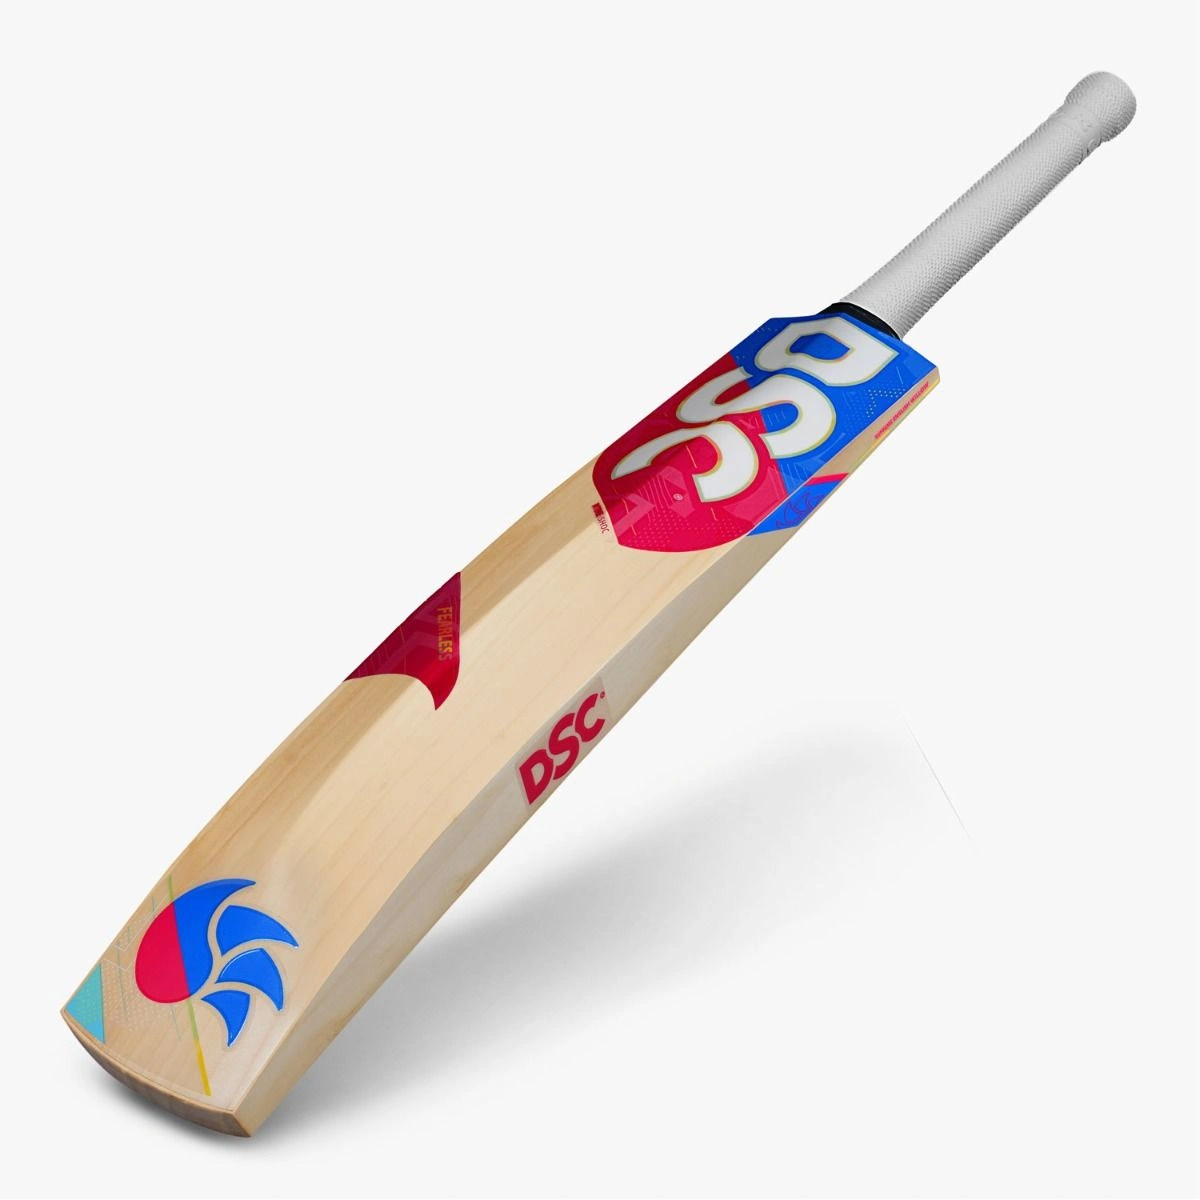 DSC Intense Shoc Grade 2 English Willow Cricket Bat: Ultra-Precise Cricket Bat with Thick Edges and Treble-Sprung Handle for Power-SH-1 Unit-2